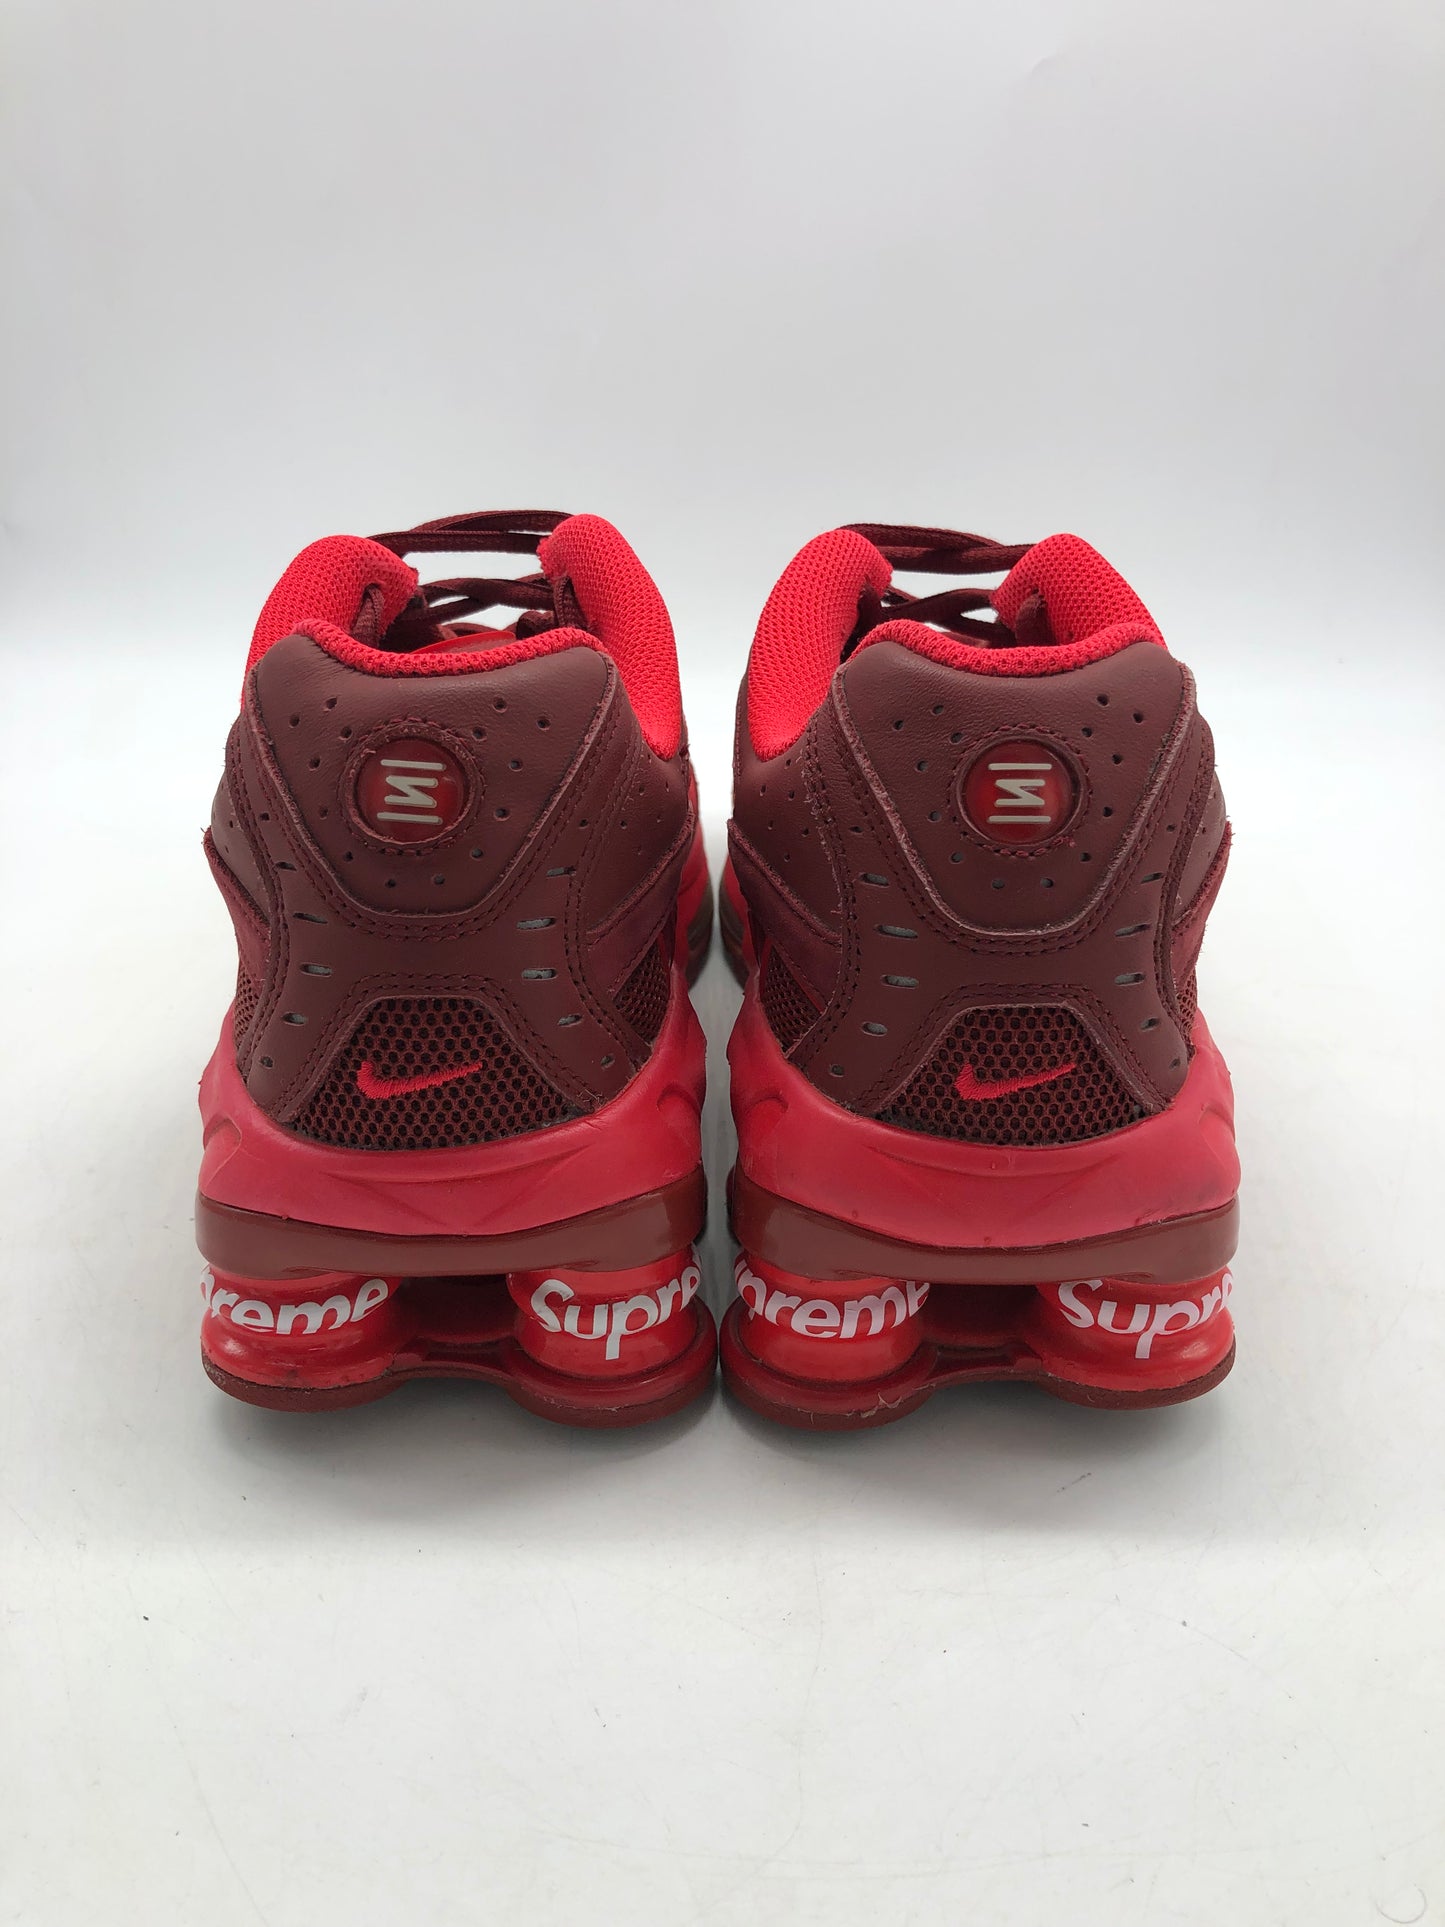 Preowned Nike Supreme Shox Ride 2 Red SP Sz 9M/10.5W